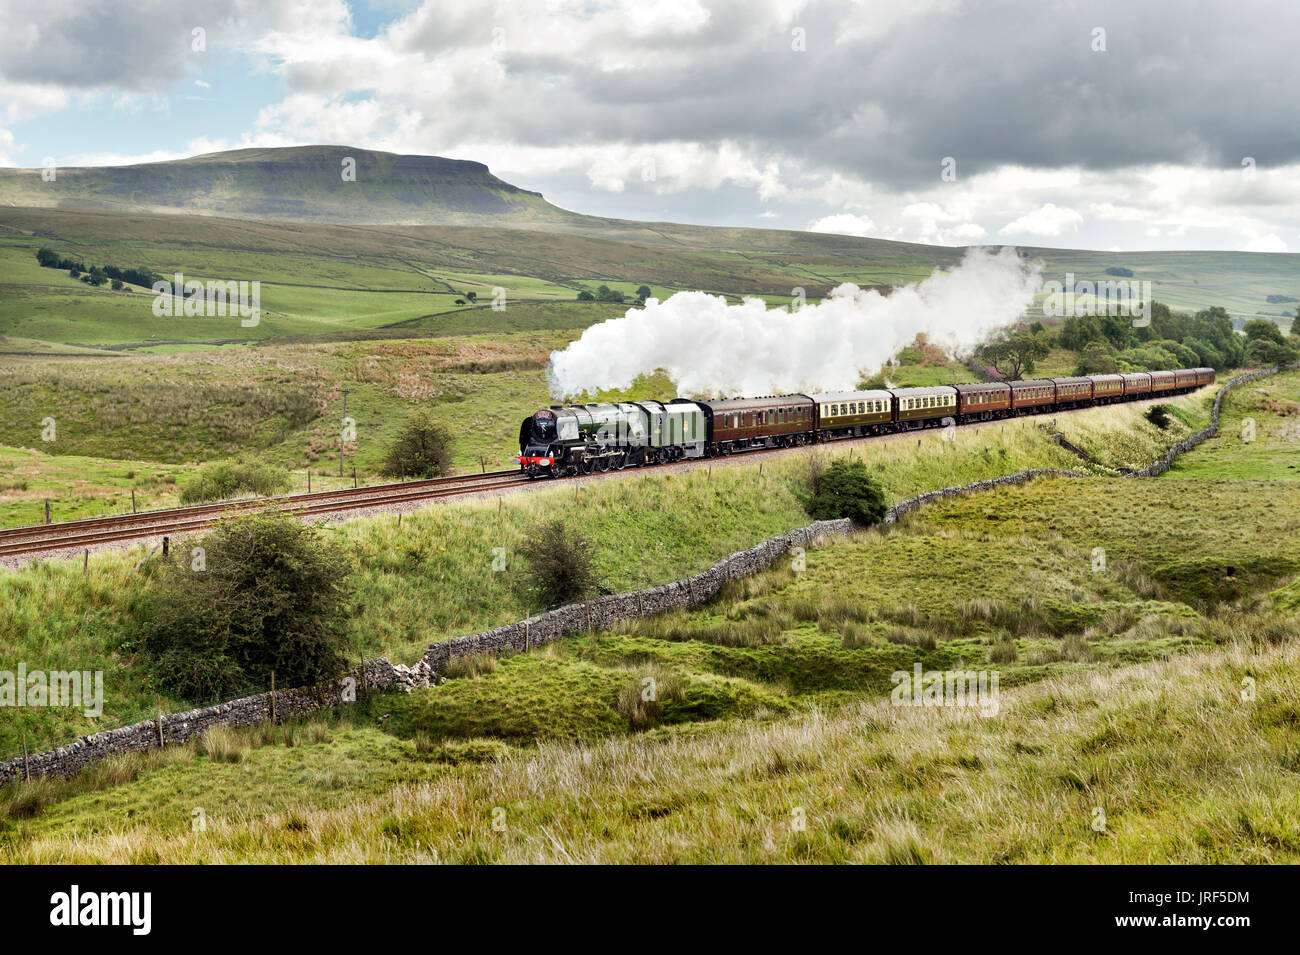 Horton-in-Ribblesdale, UK. 05th Aug, 2017. The Duchess of Sutherland steam locomotive hauls the Cumbrian Mountain Express special train through Ribblesdale in the Yorkshire Dales, on the scenic Settle-Carlisle railway near Horton-in-Ribblesdale. In the background is Pen-y-Ghent peak. Credit: John Bentley/Alamy Live News Stock Photo